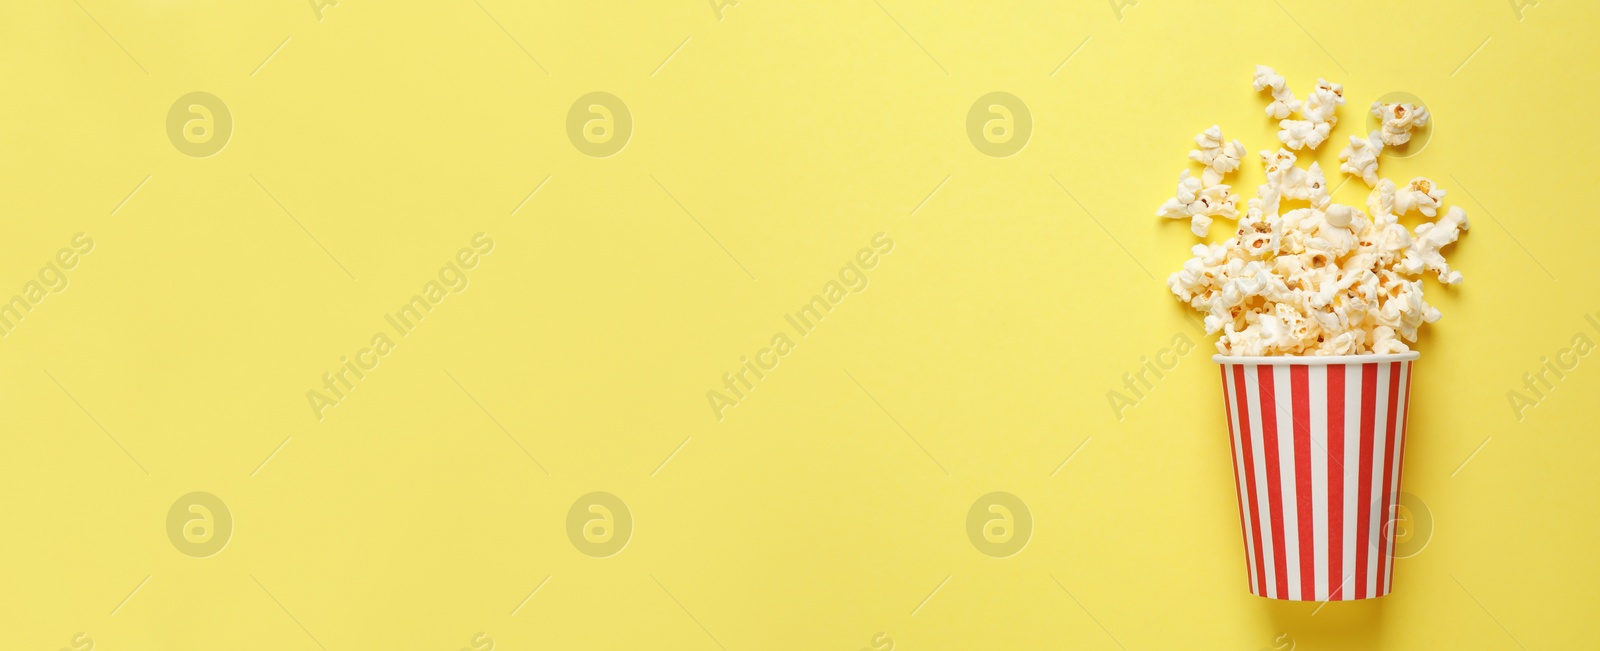 Image of Delicious popcorn and space for text on yellow background, top view. Banner design